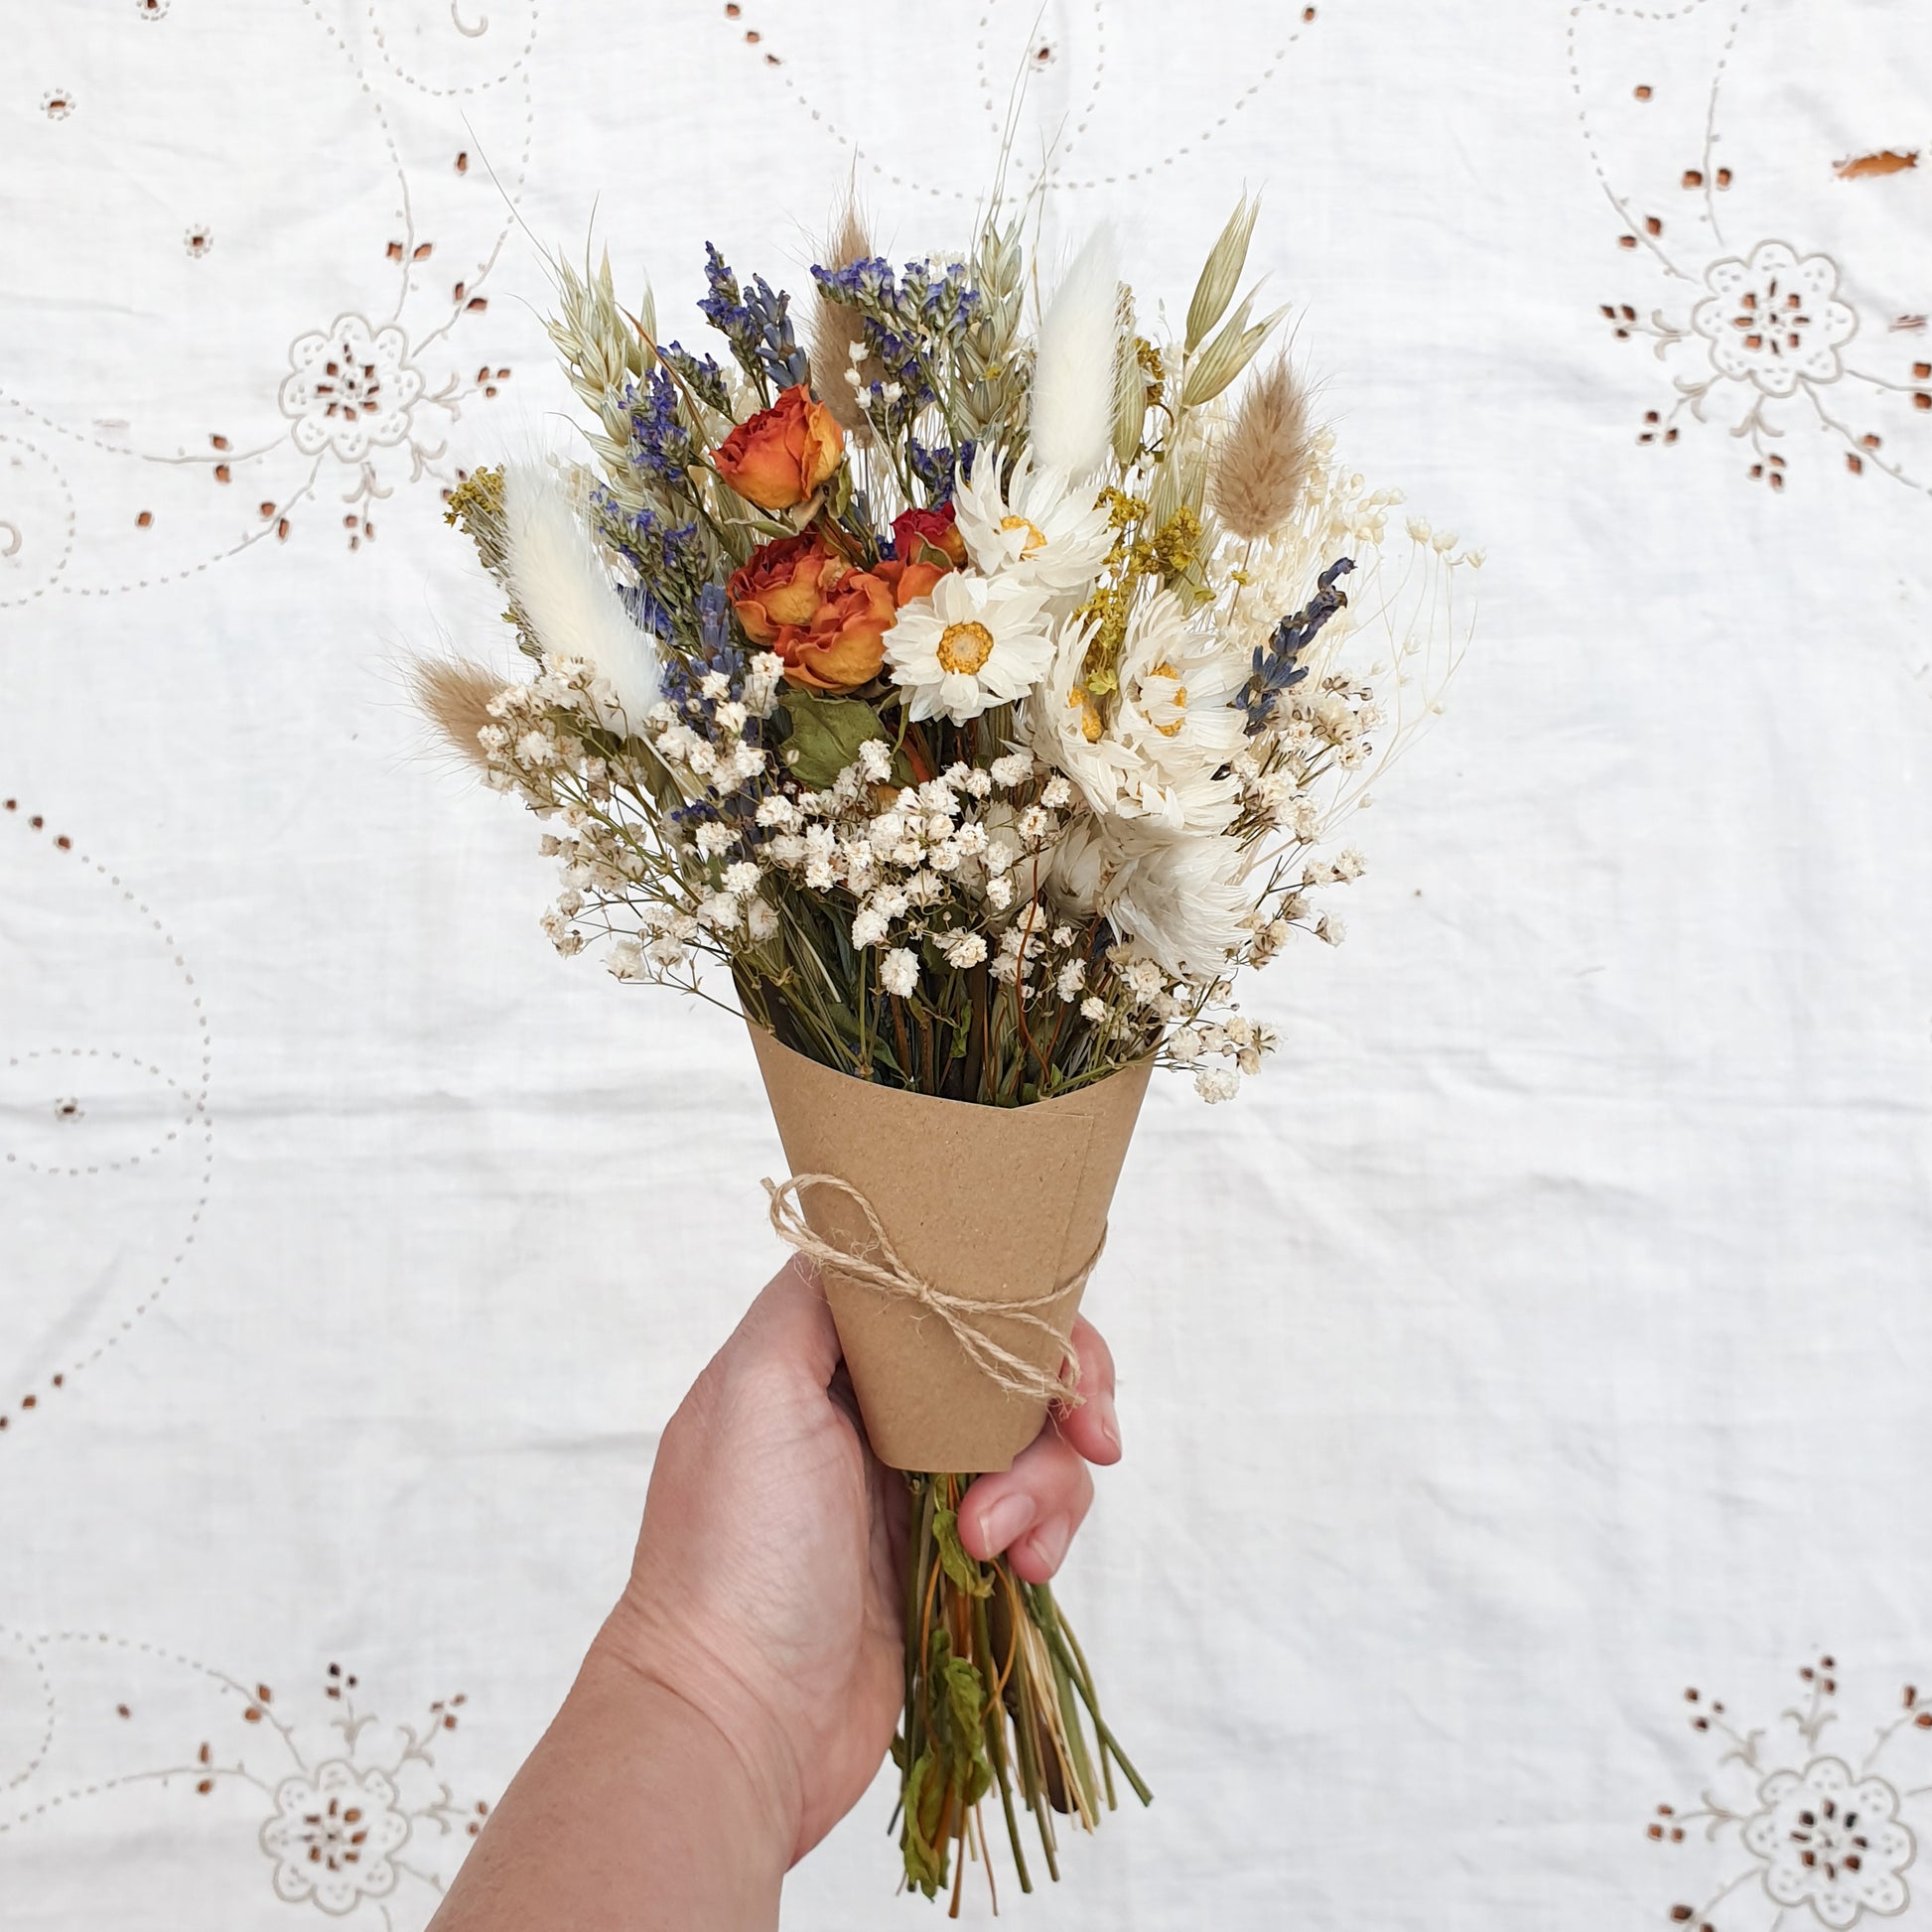 The mini size of the bouquet is shown held in the hand, it is a cute and petite size of posy, suitable for small bottles and bud vases.